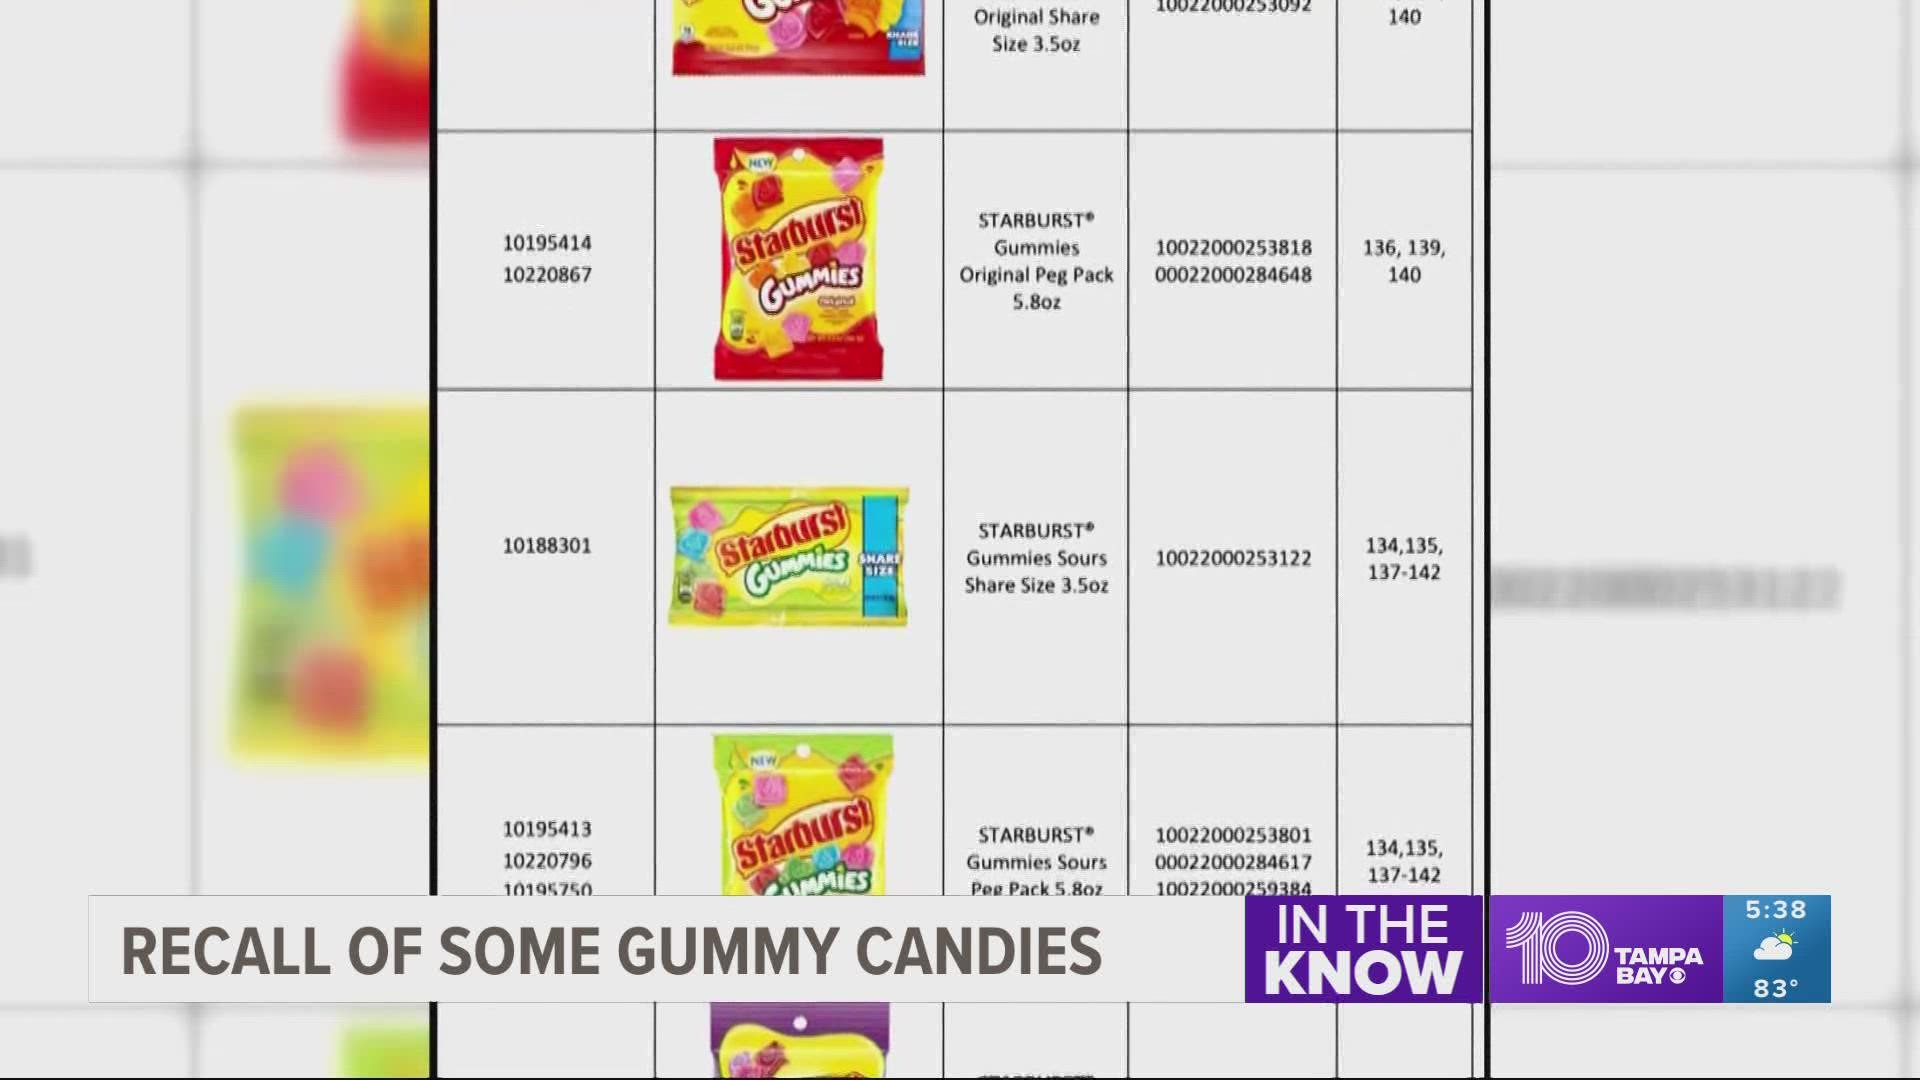 Certain varieties of Starburst, Skittle and Life Saver gummies are being recalled for containing metal fragments, Mars Wrigley said.